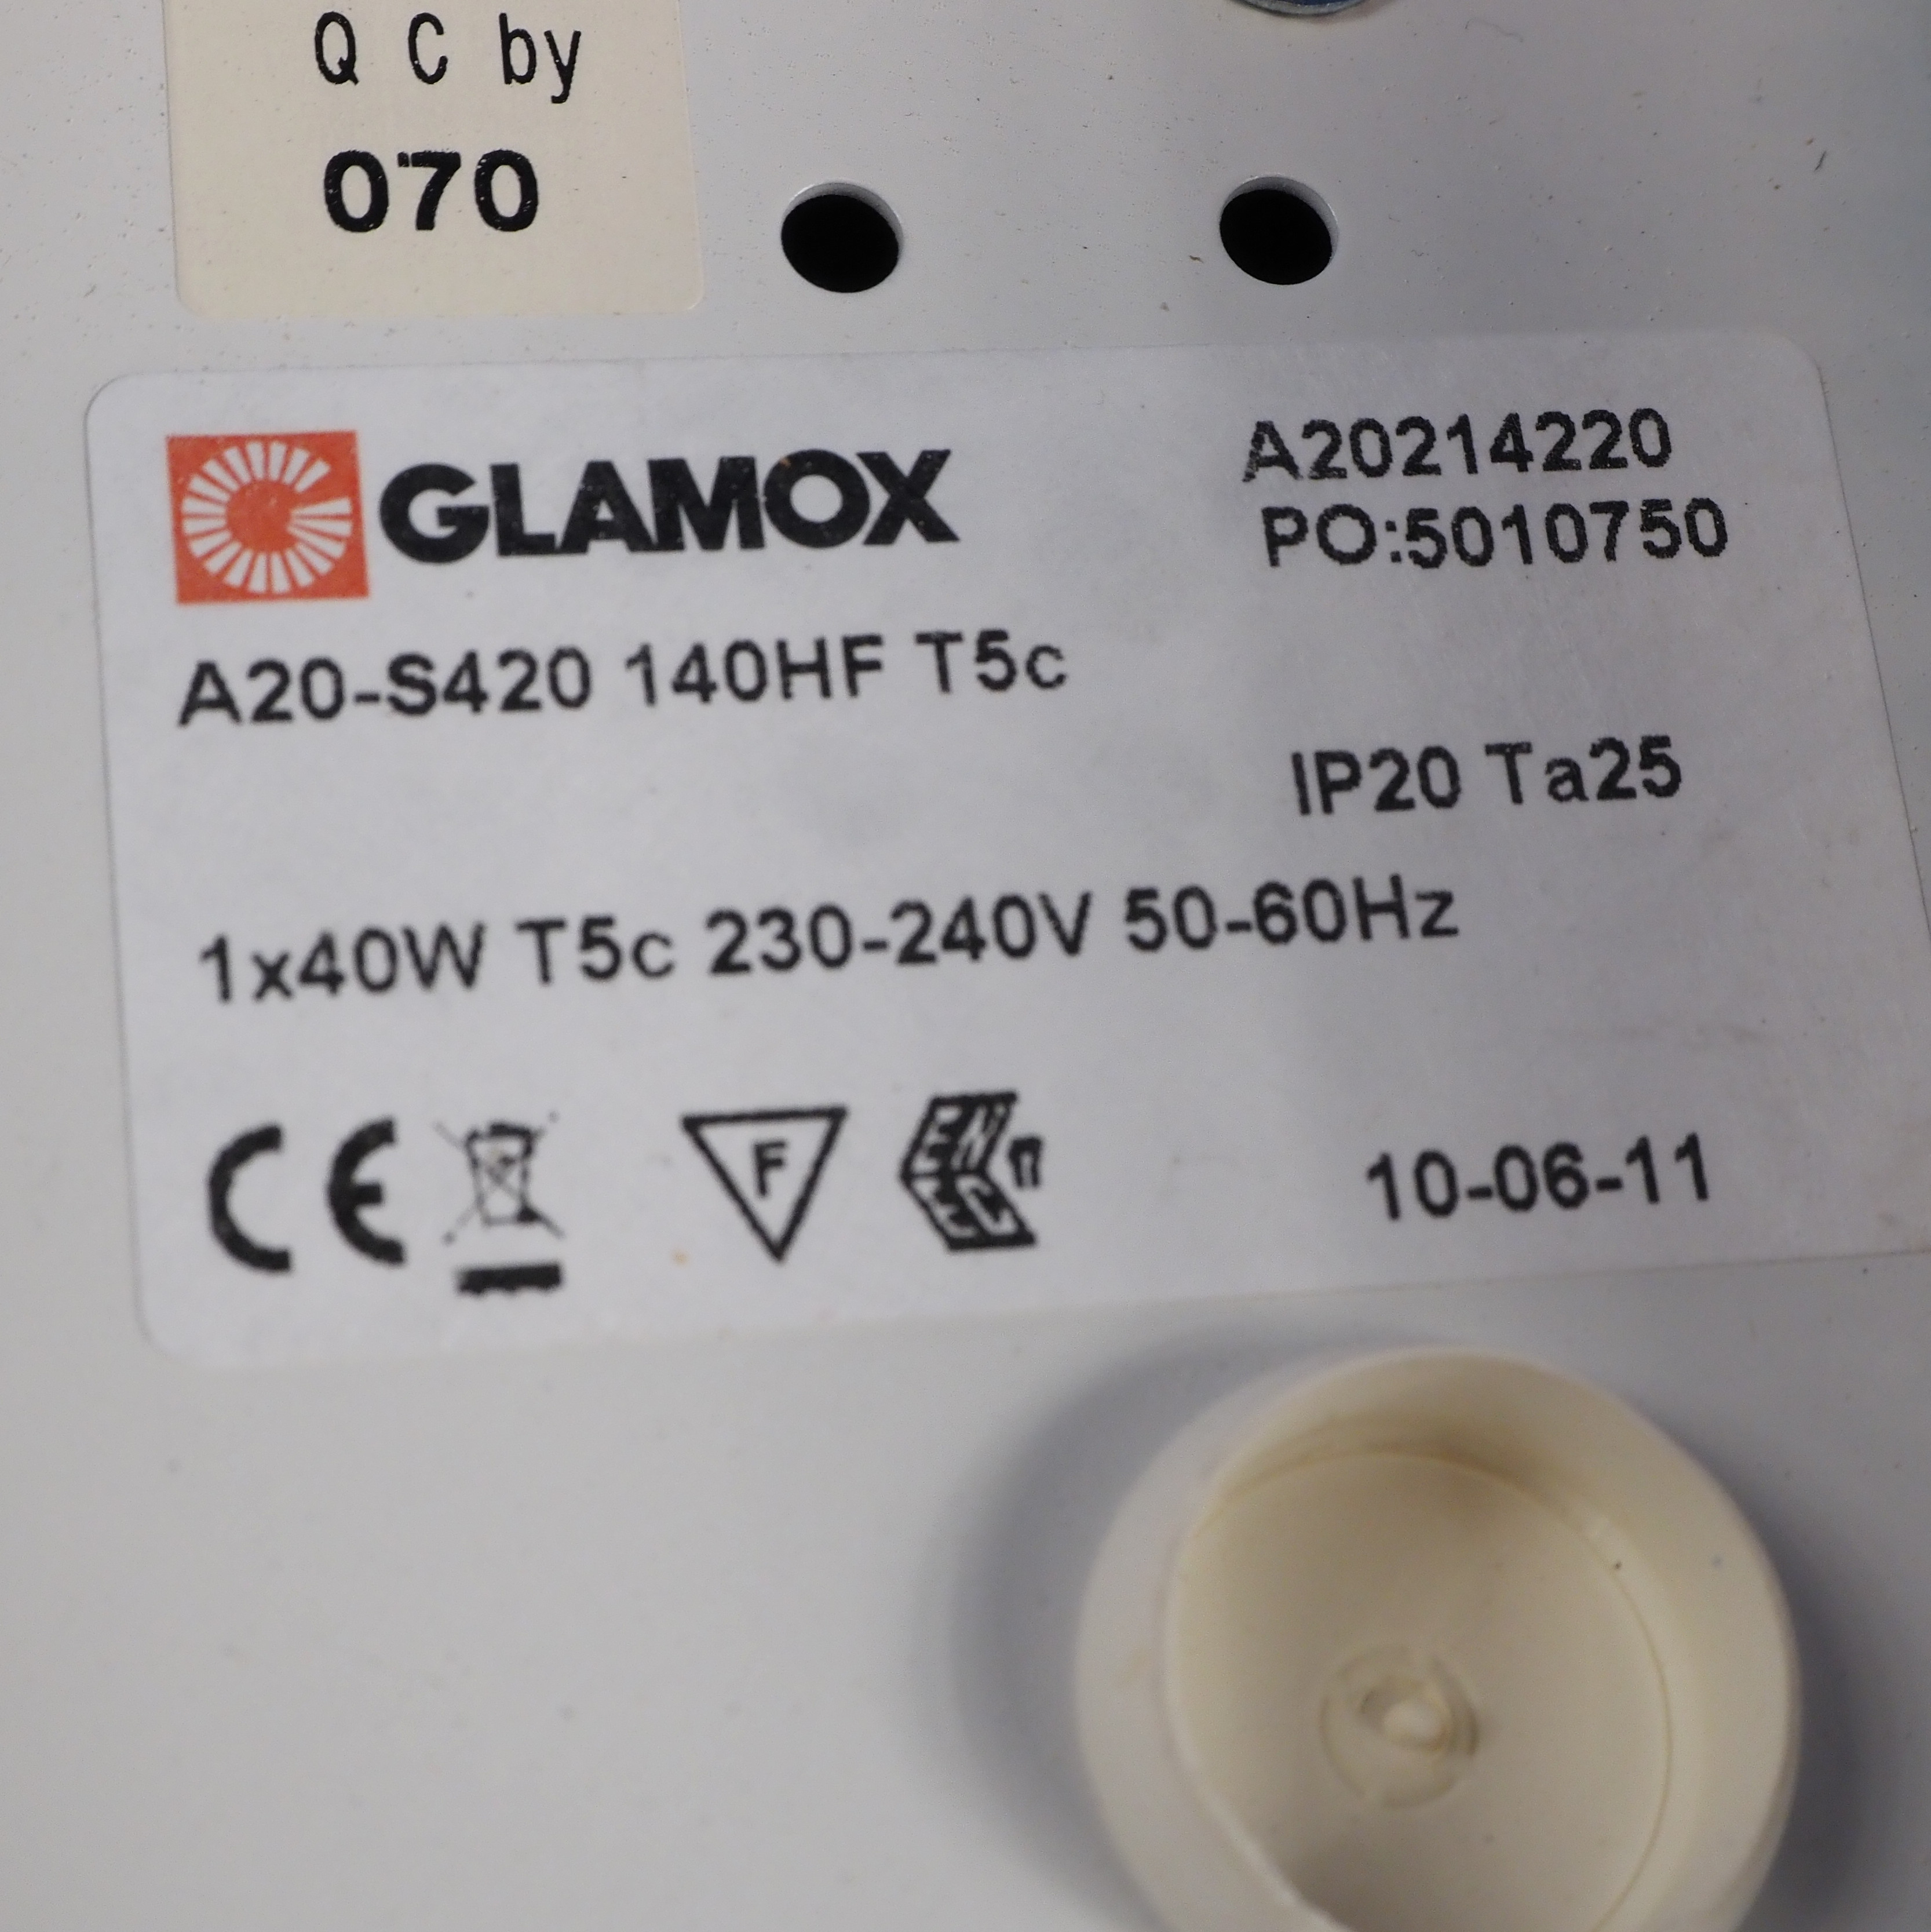 Wall/Ceiling light by Glamox